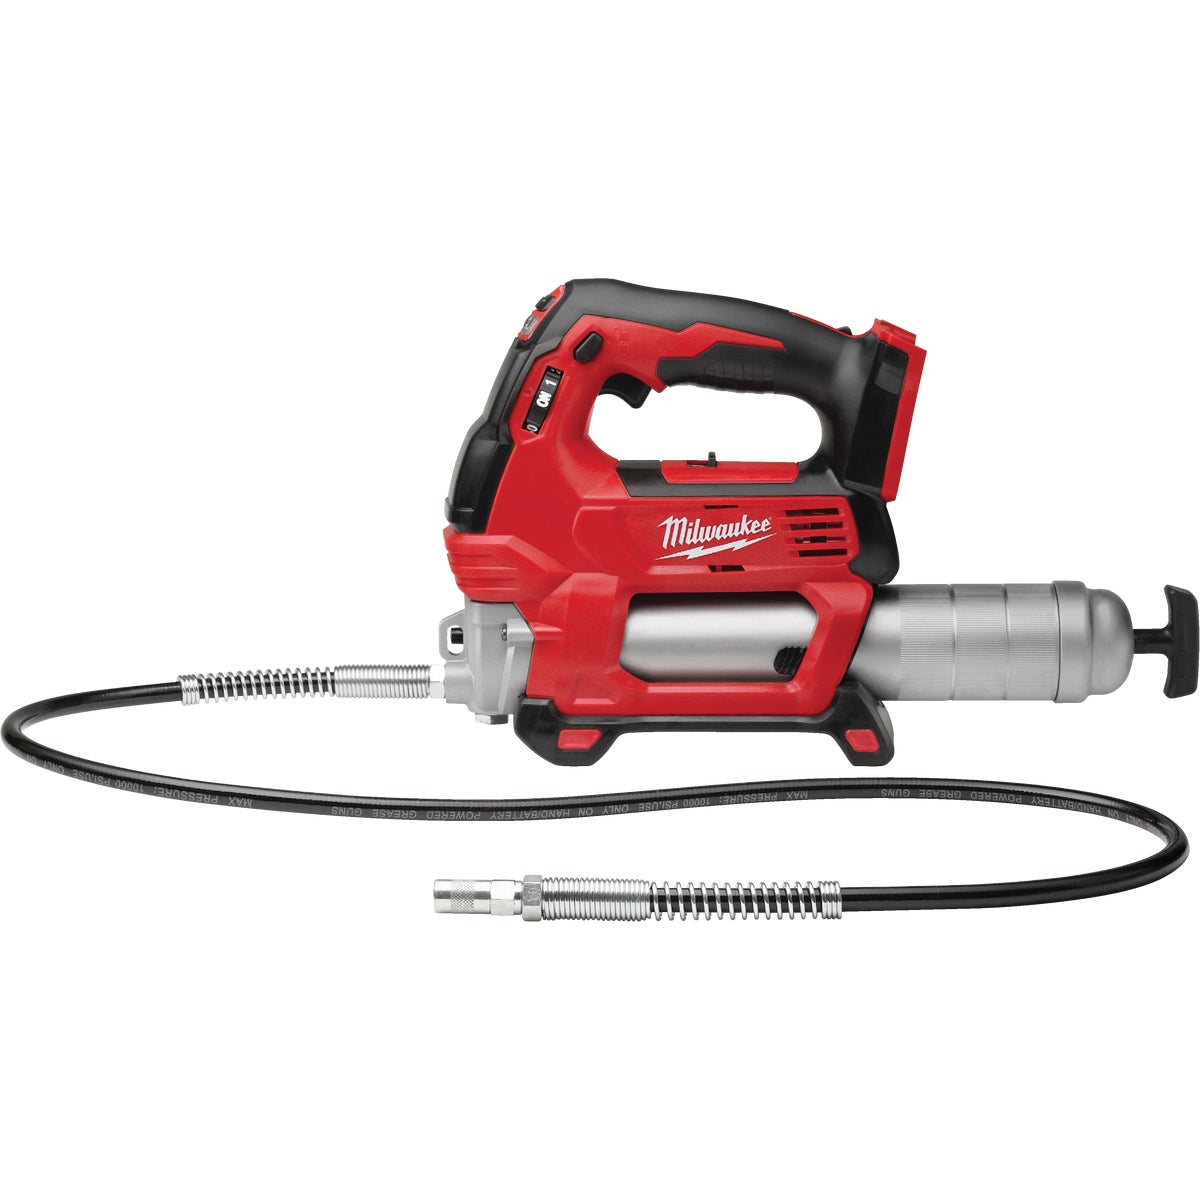 Item 303730, The M18 Cordless 2-Speed Grease Gun delivers maximum pressure and unmatched